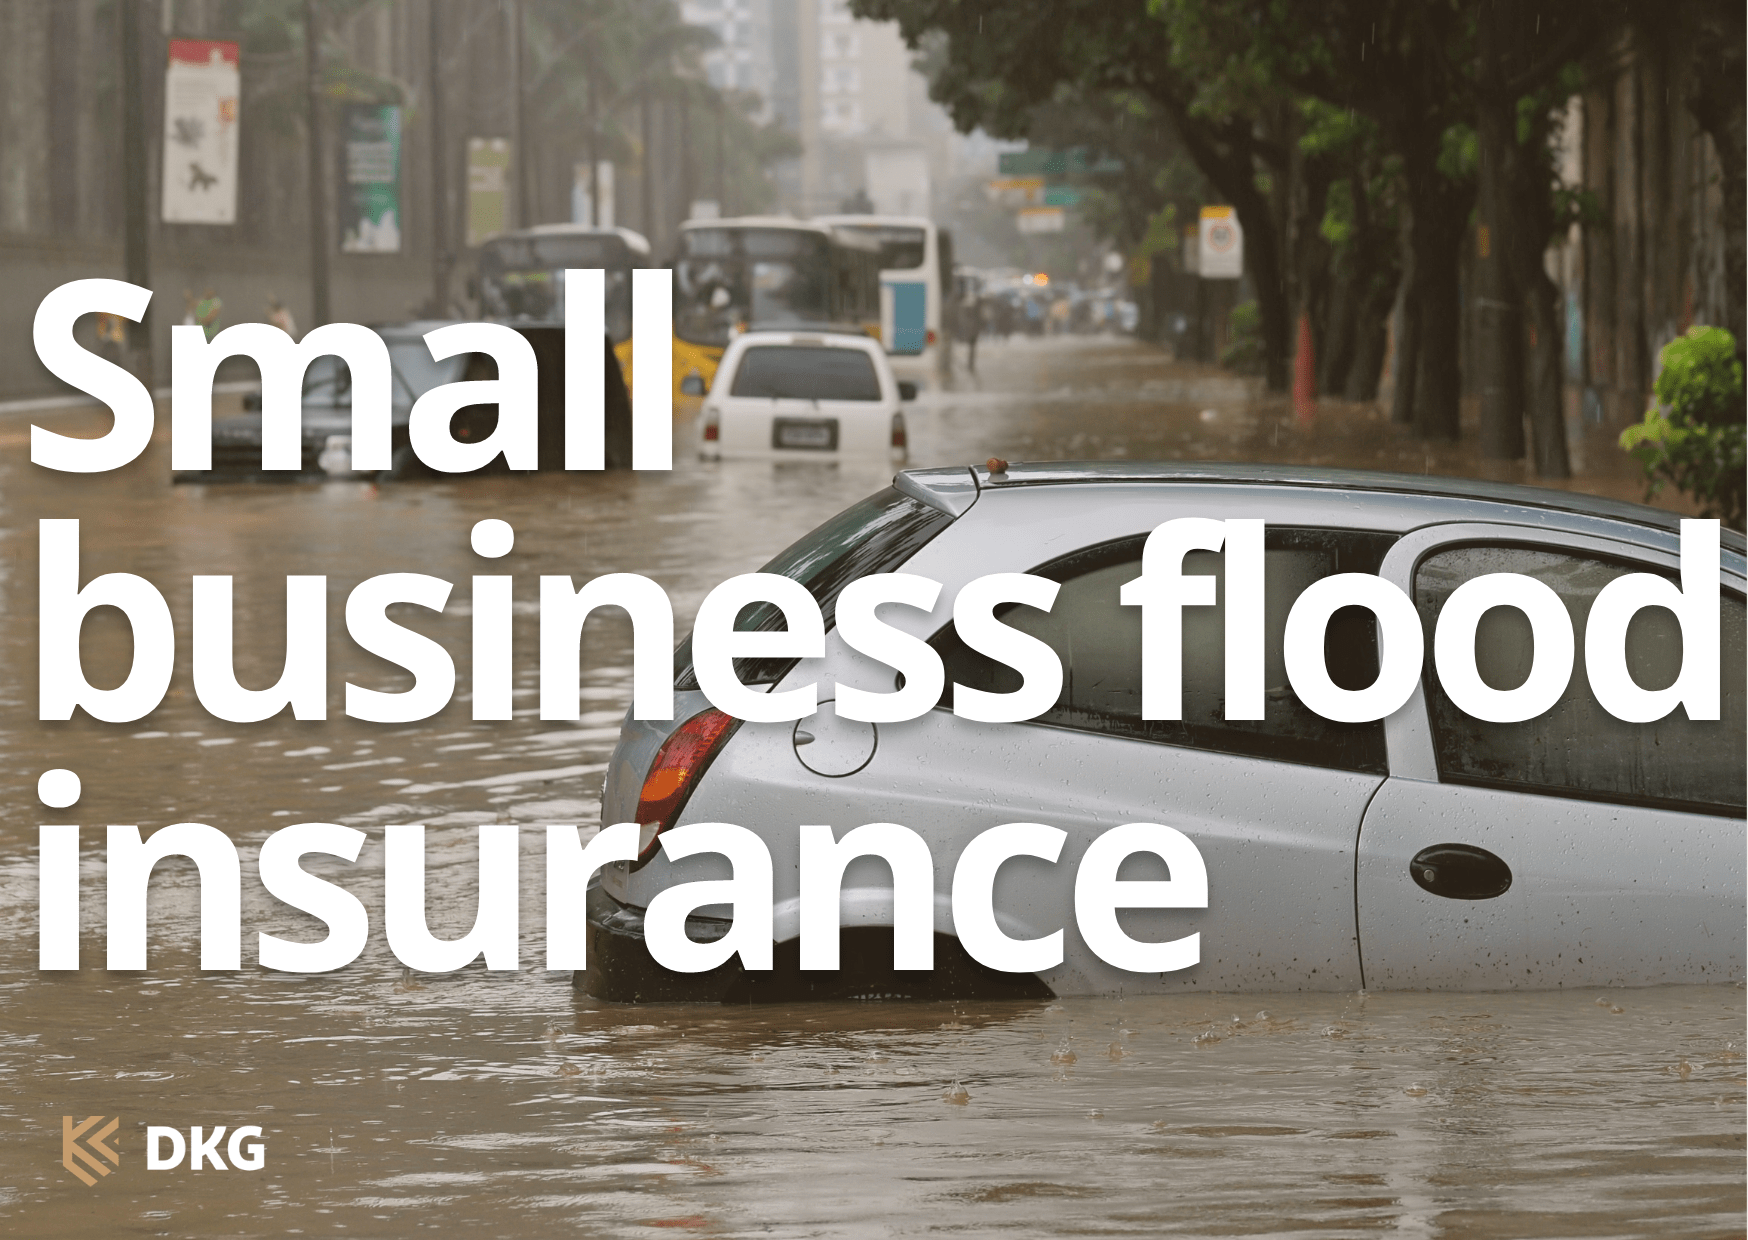 Image of a flooded street with cars and buses floating with the heading small business flood insurance